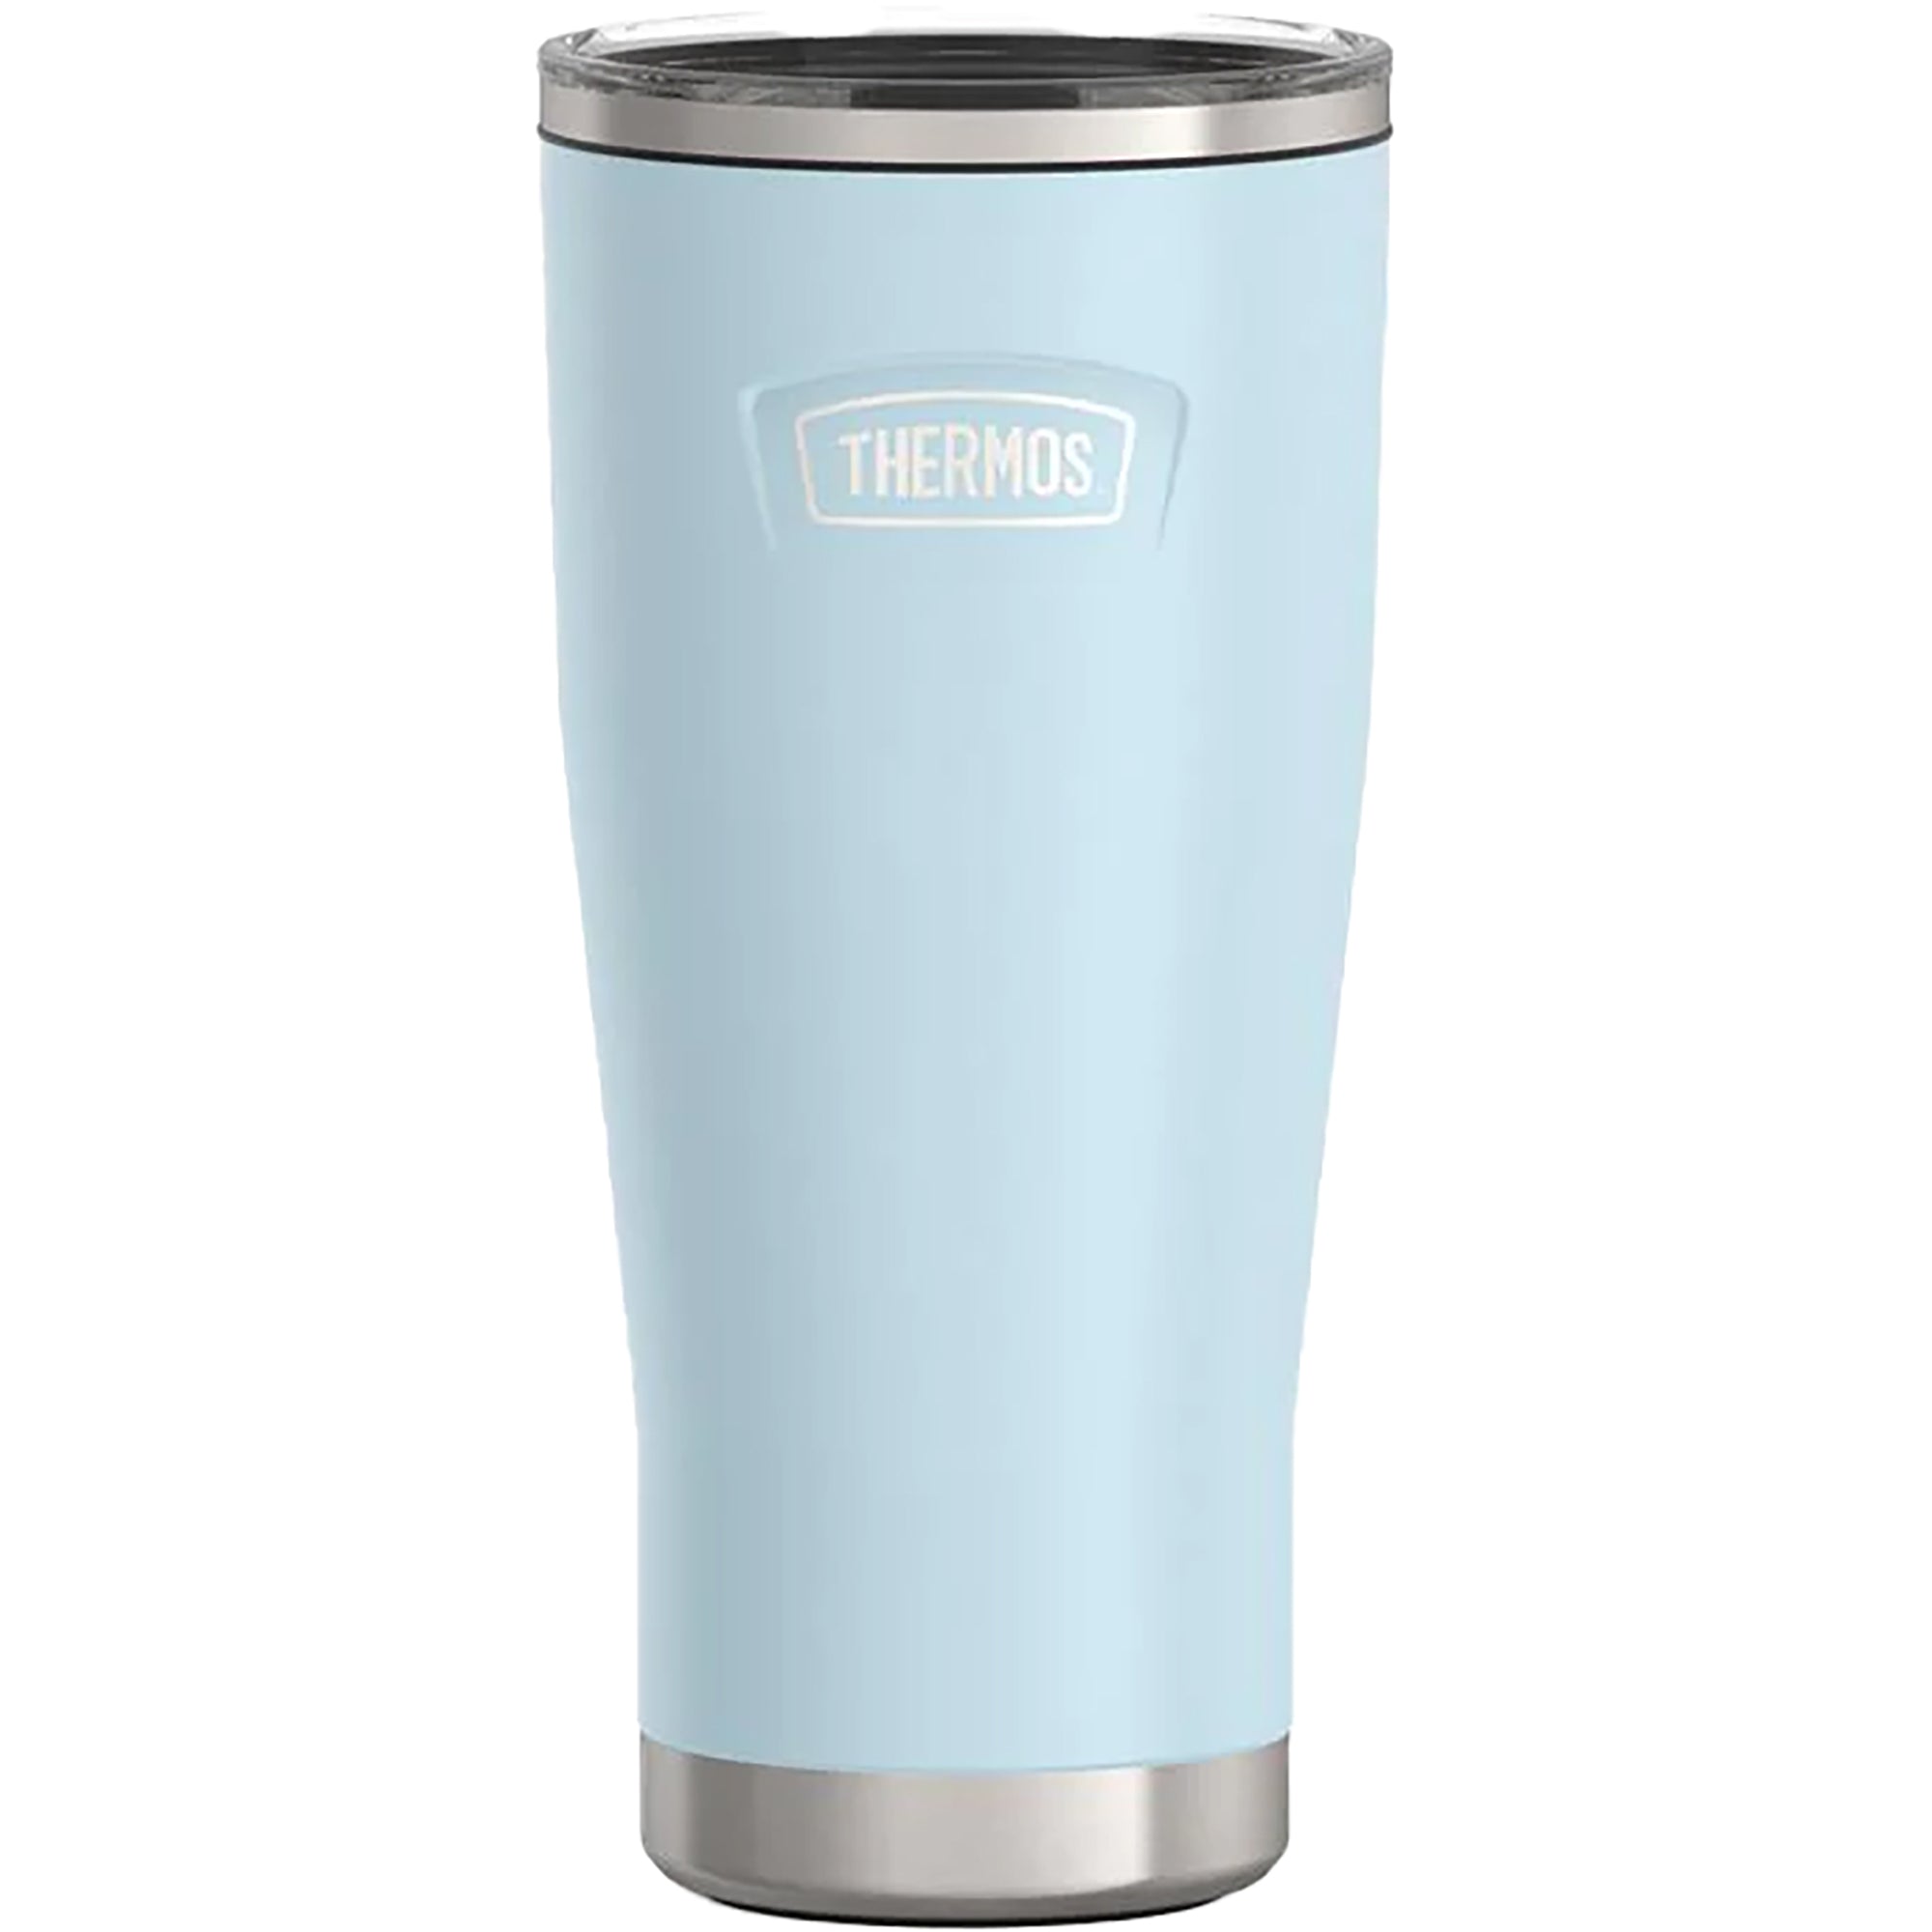 Thermos 24 oz. Icon Vacuum Insulated Stainless Steel Slide Lock Tumbler Thermos